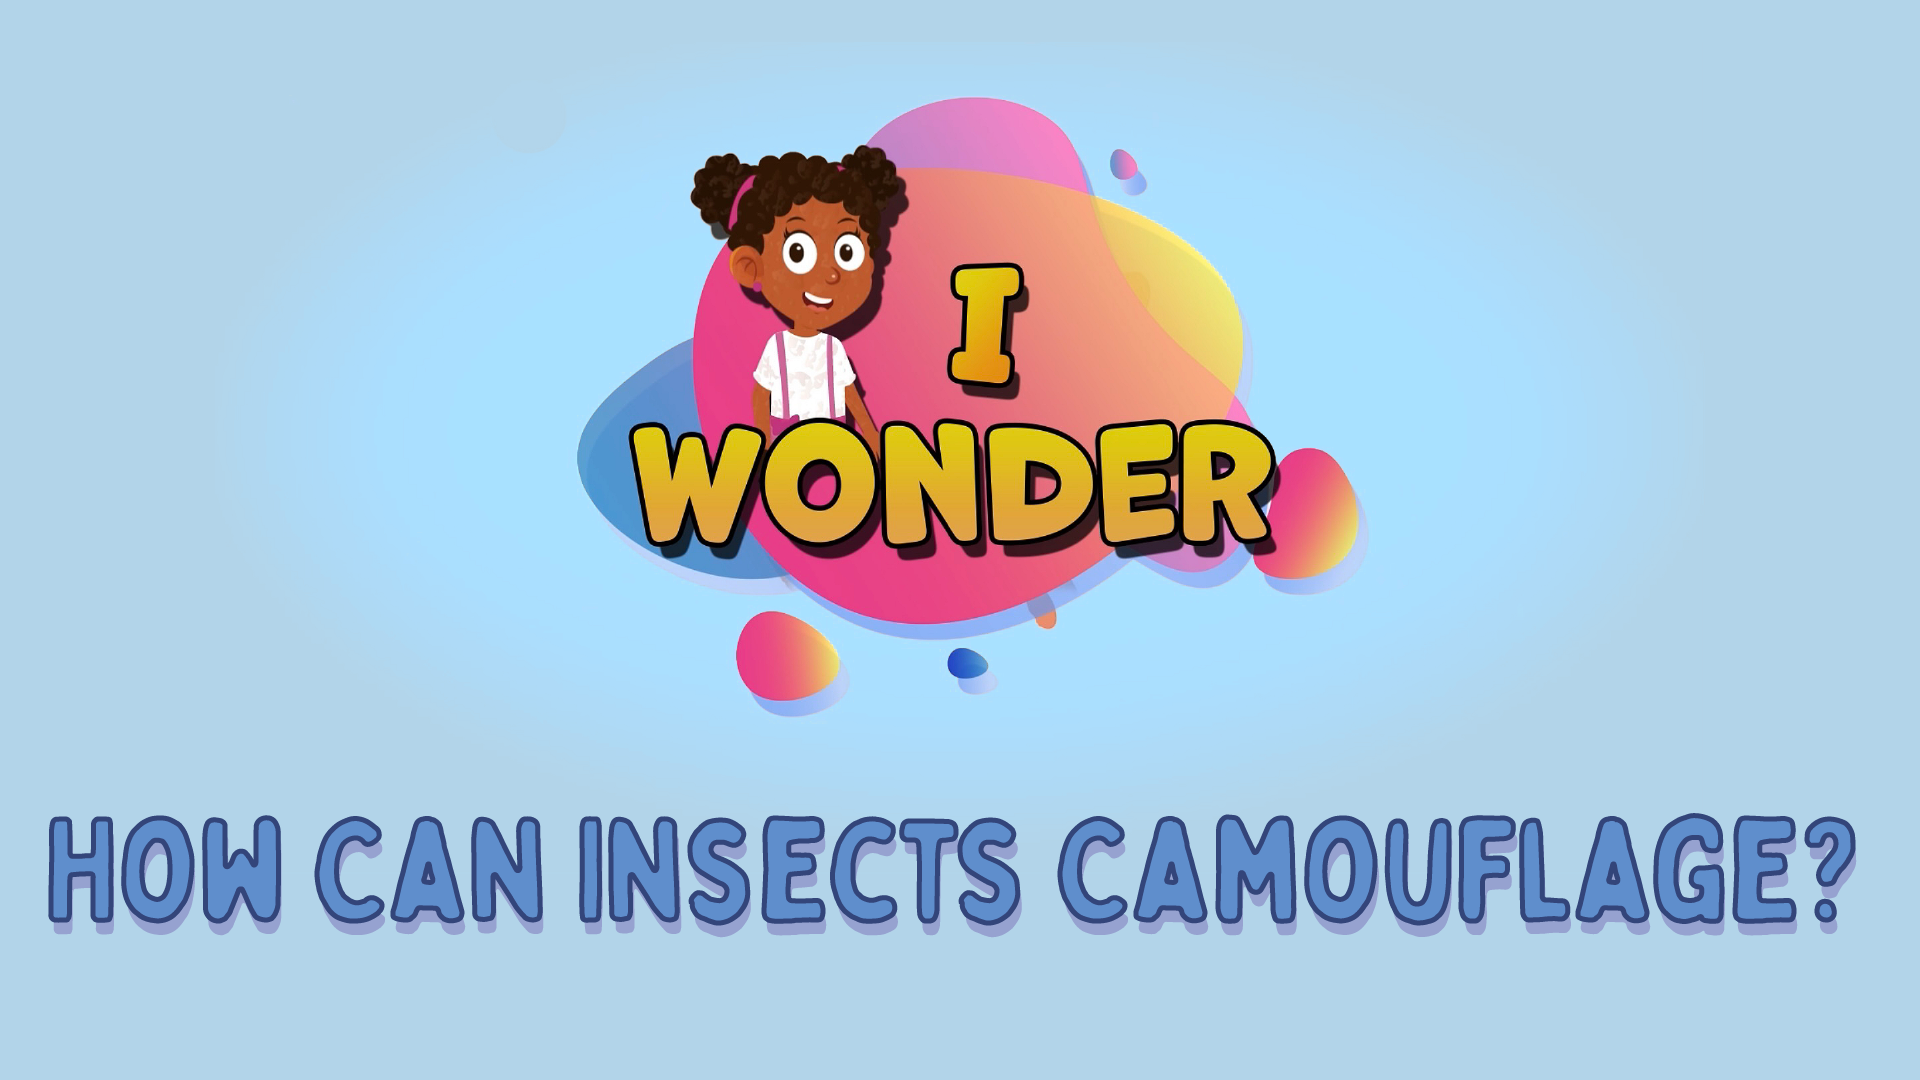 How Can Insects Camouflage?